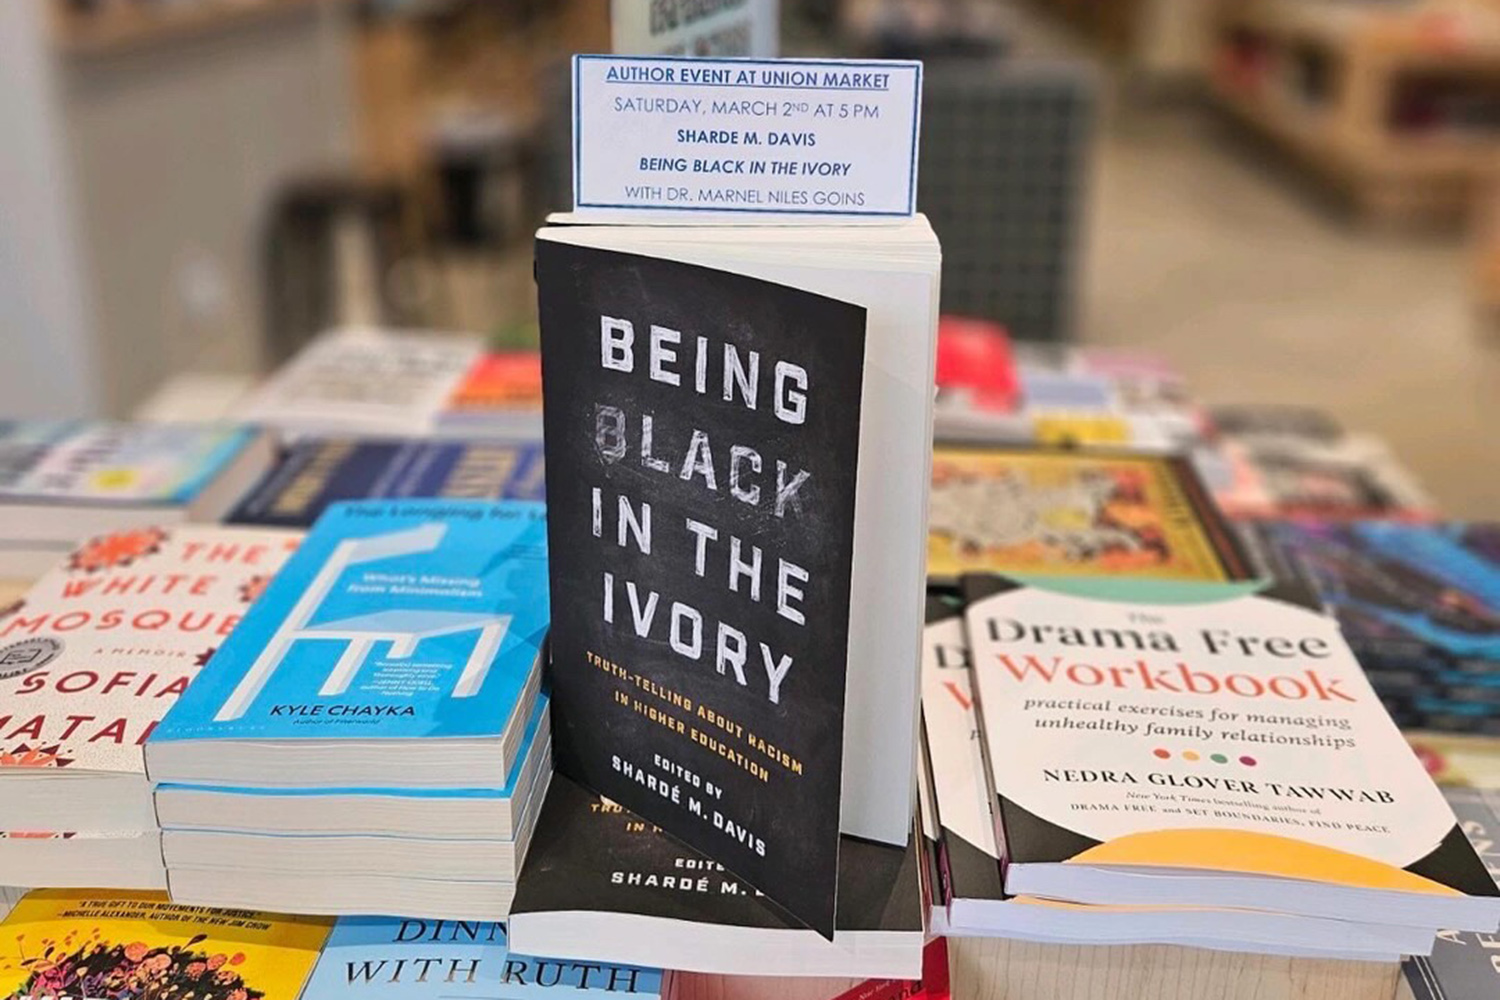 "Being Black in the Ivory" book sitting on a shelf with other books.